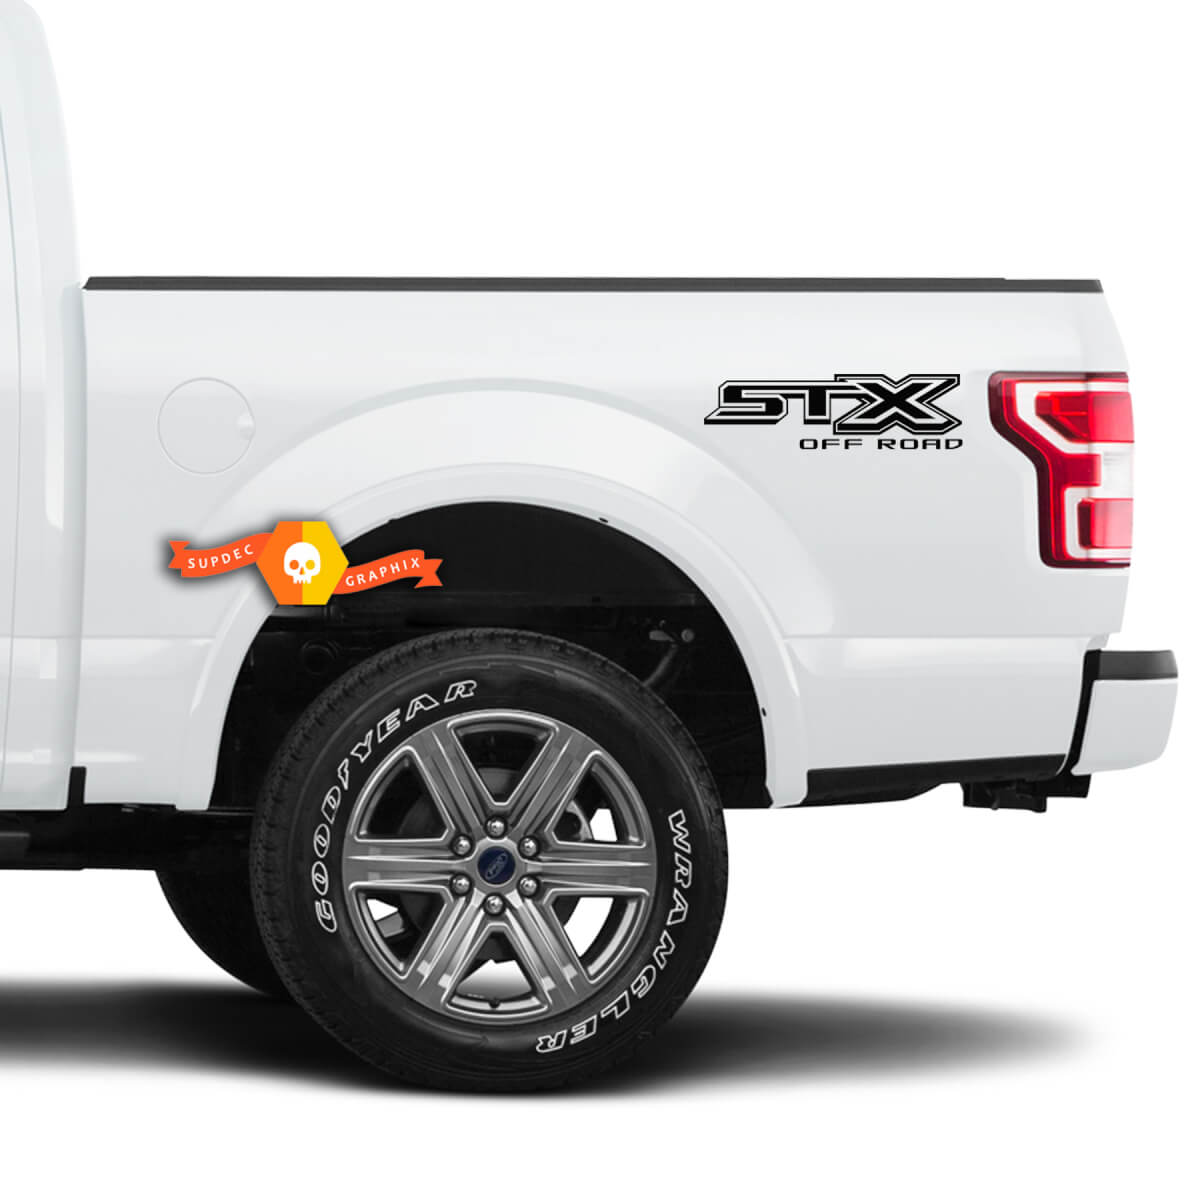 Pair STX Off-Road 4X4 Decals For Ford F150 F250 F350 Super Duty Truck Sticker Decal Vinyl
